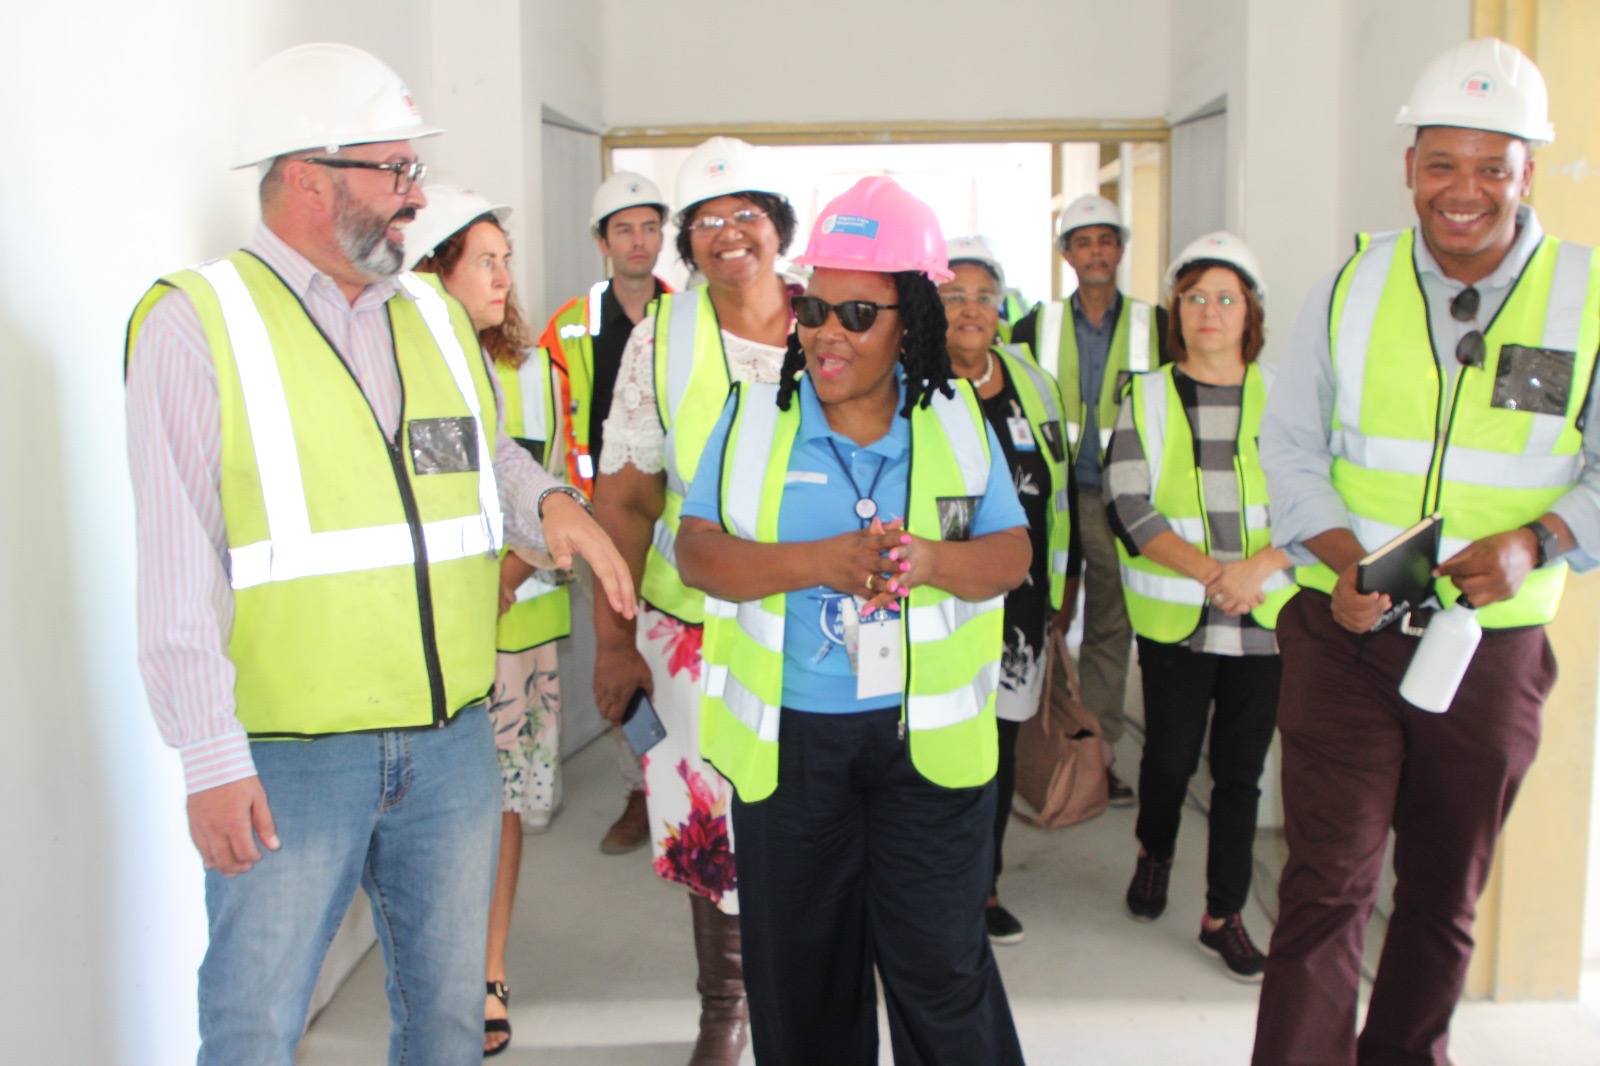 Minister Mbombo touring the construction site to inspect the progress being made with the contractors, civil society and political representatives.